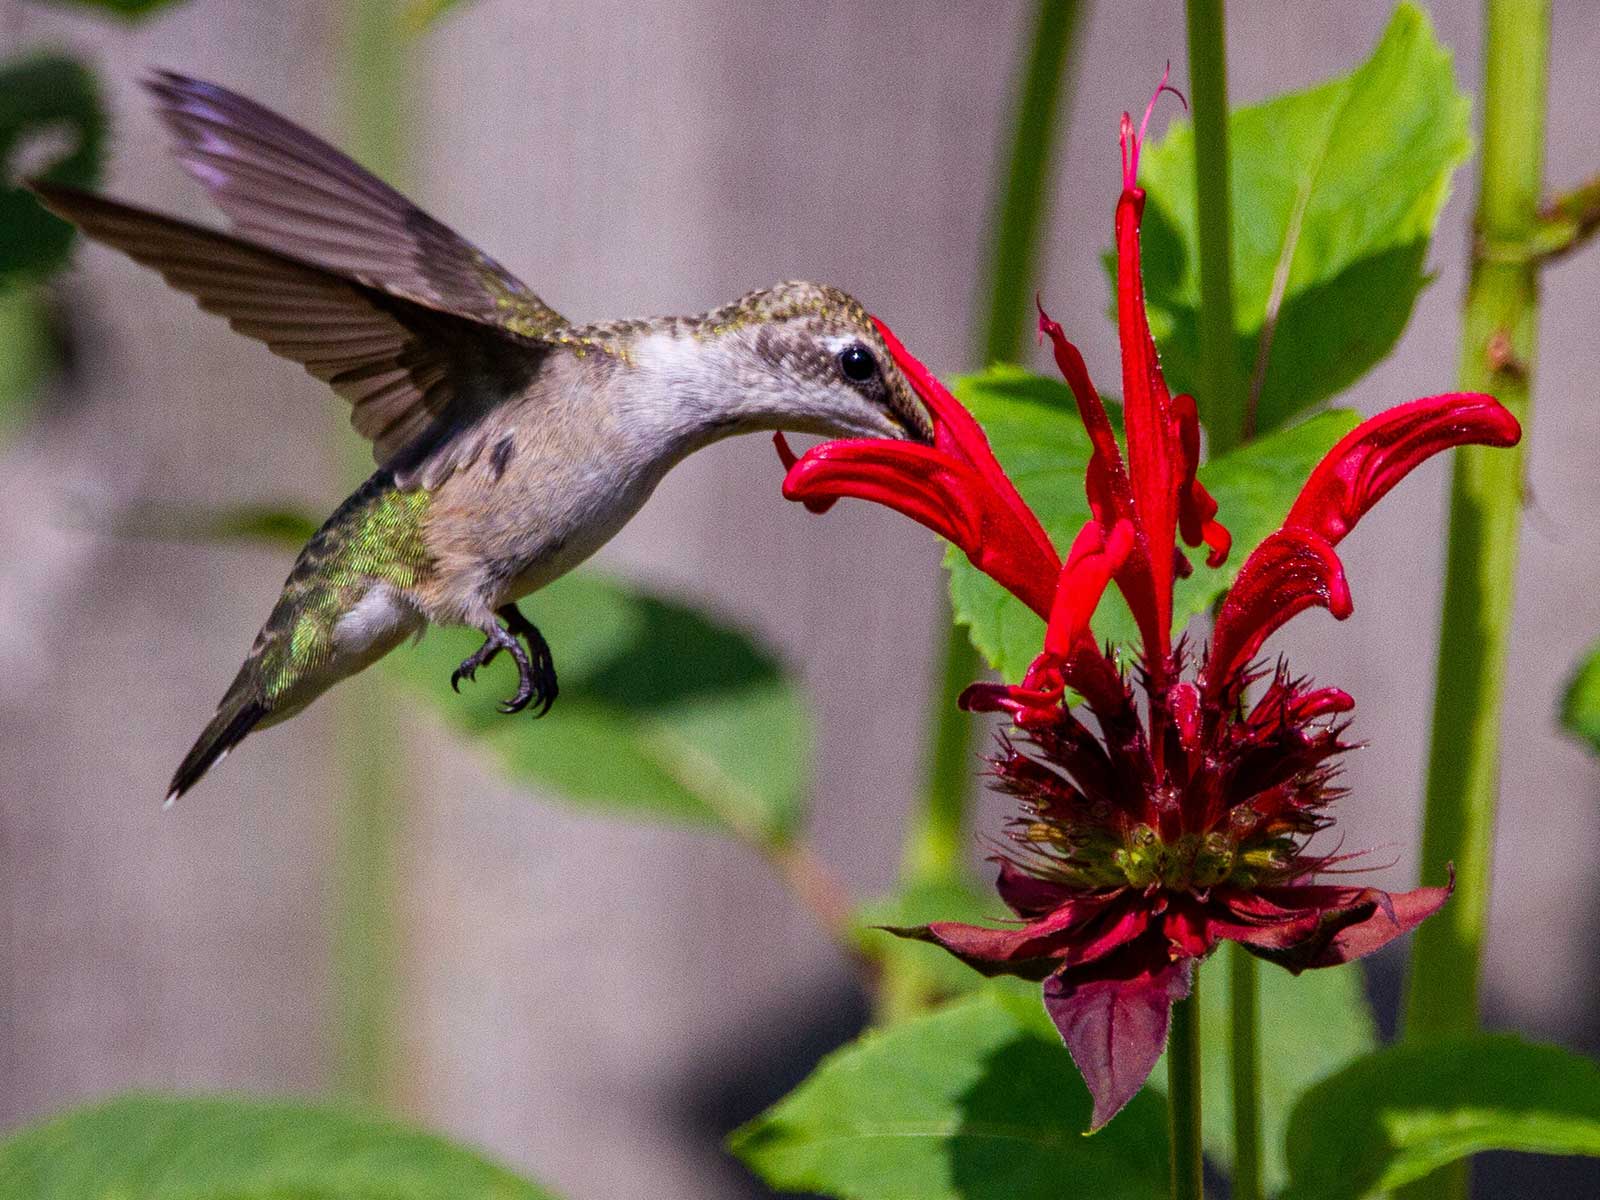 Bee Balm for hummingbirds is available in many varieties and colors. The Scarlet Bee Balm is most preferred by hummingbirds. The spiky red and scarlet clusters beautify our gardens and the hummingbirds certainly enjoy them. 